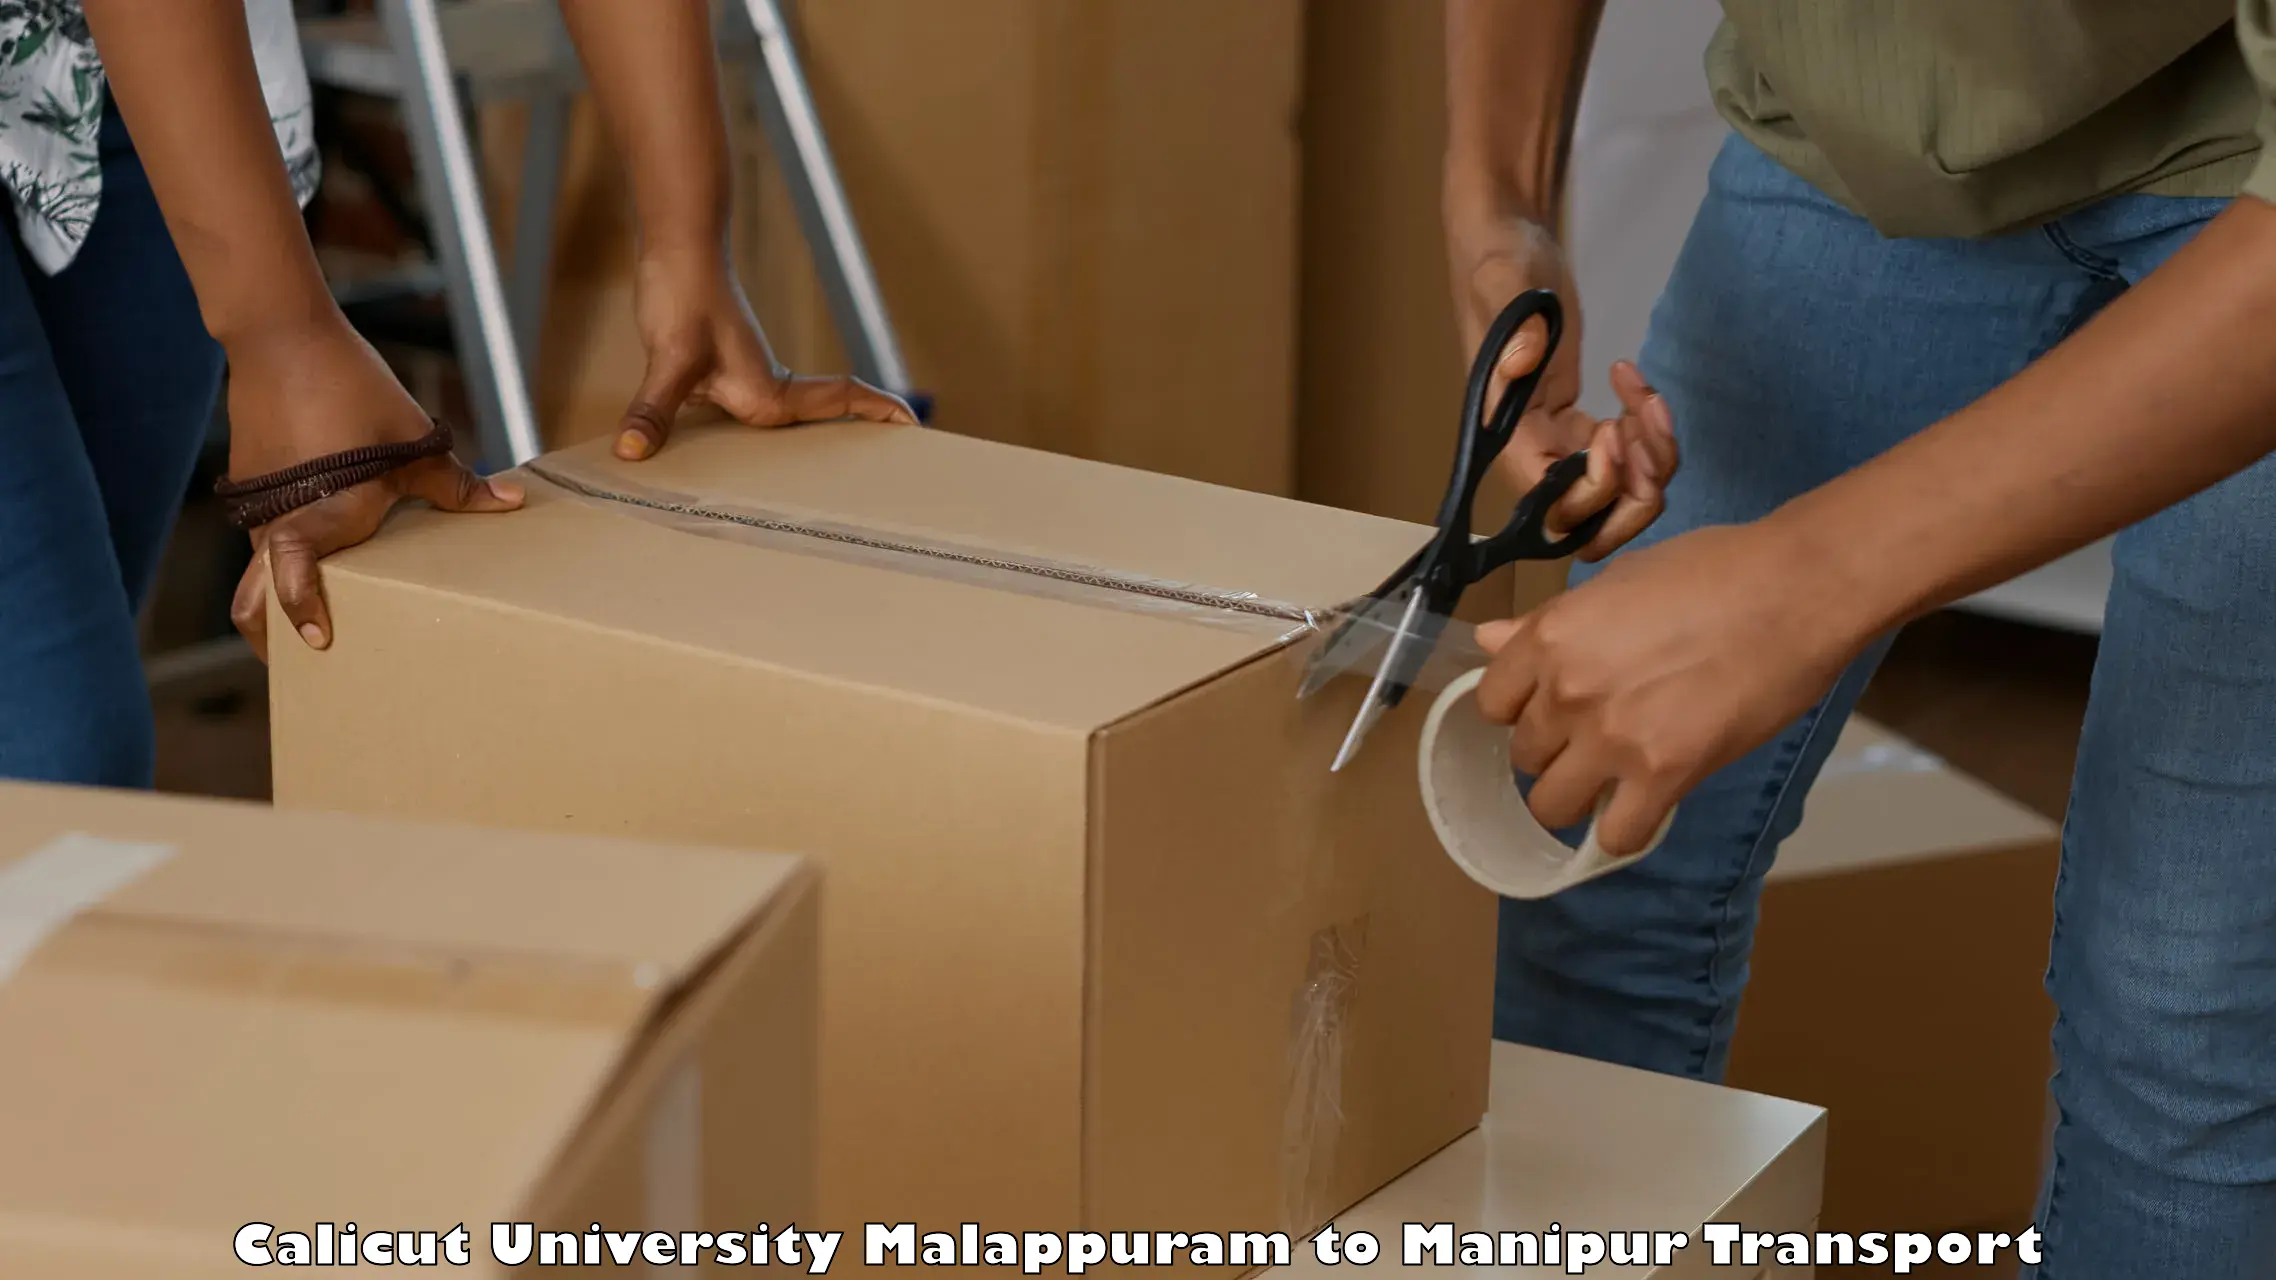 Package delivery services Calicut University Malappuram to Thoubal